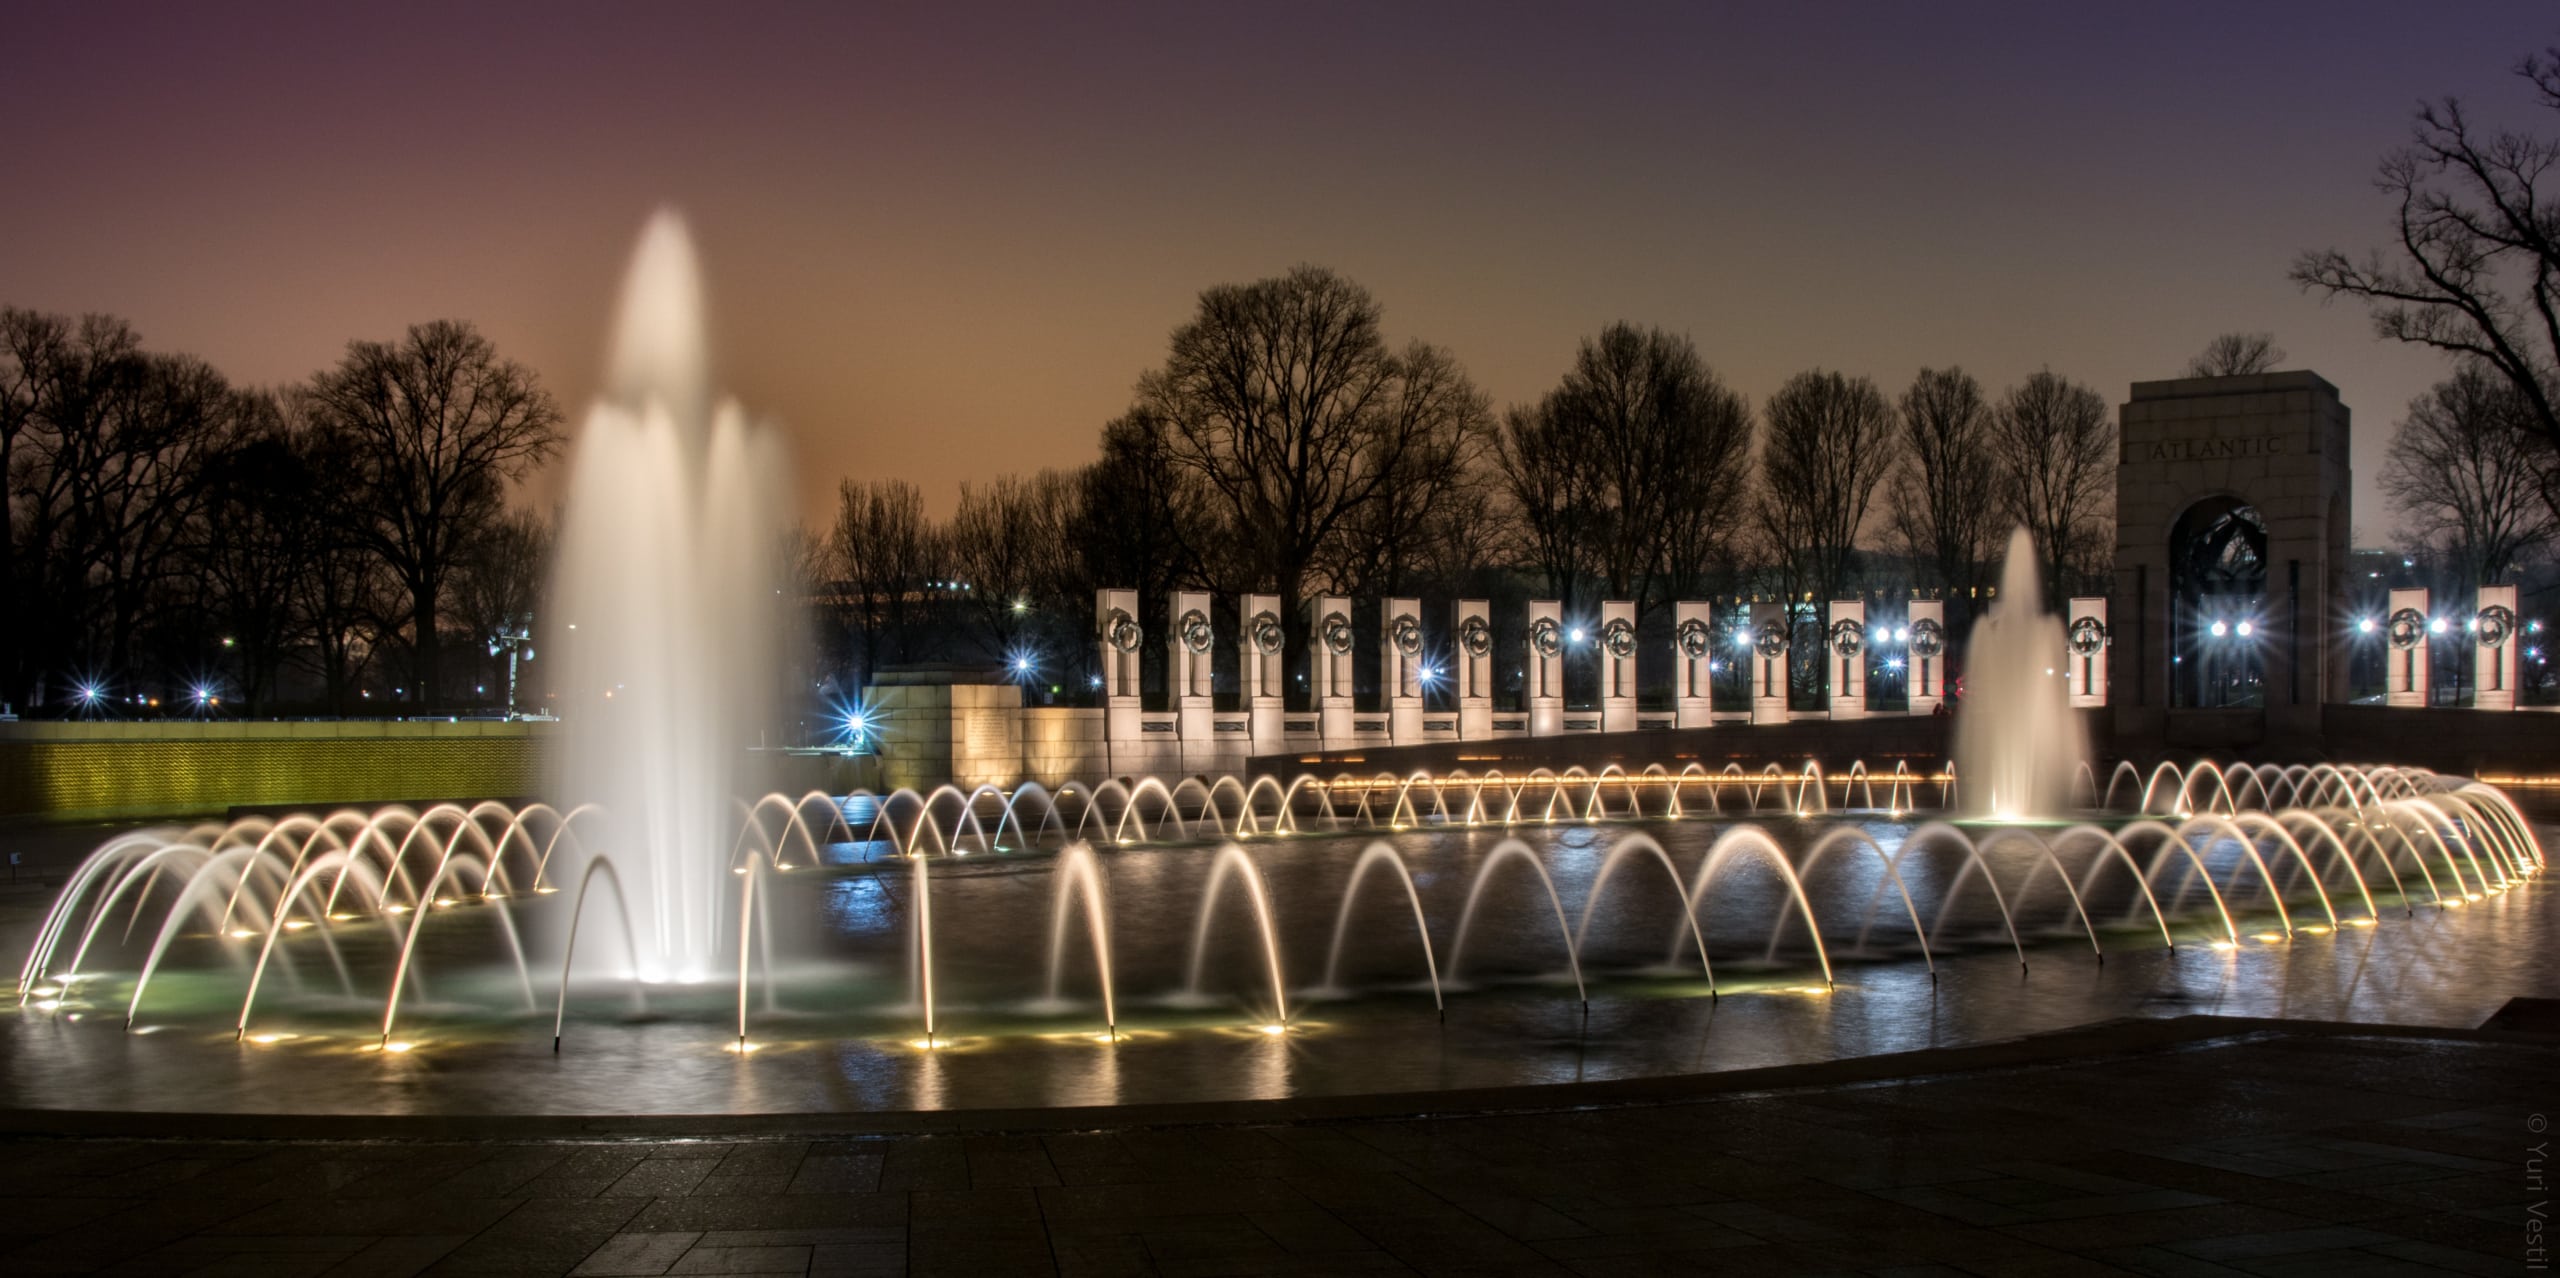 The National World War II Memorial at night. The area is well-lit, revealing a series of bronze plaques detailing various World War II veteran accounts.